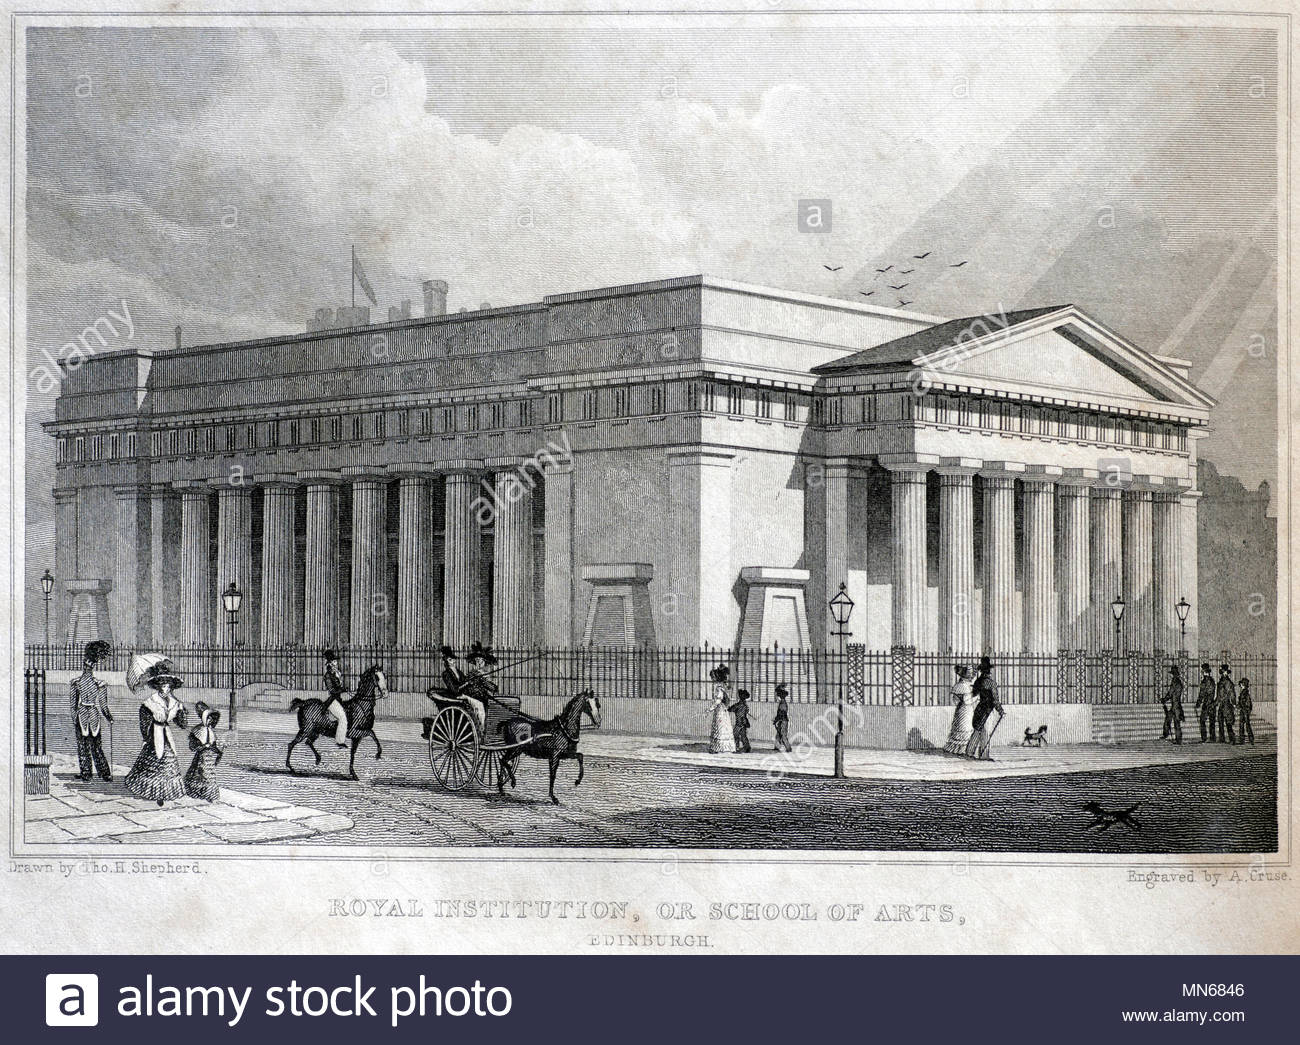 Royal Institution or School of Arts, Edinburgh, antique engraving from 1829 Stock Photo